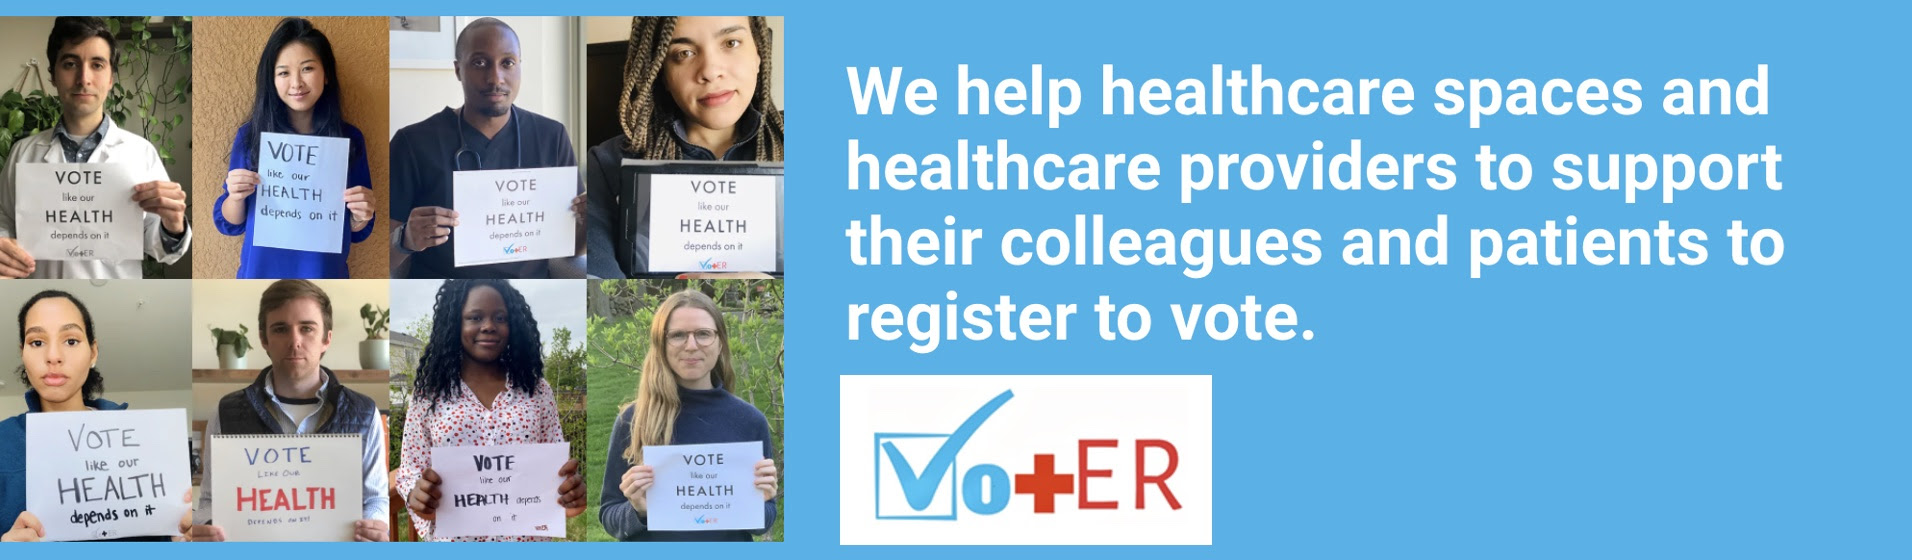 We help healthcare spaces and healthcare providers to support their colleagues and patients to register to vote.